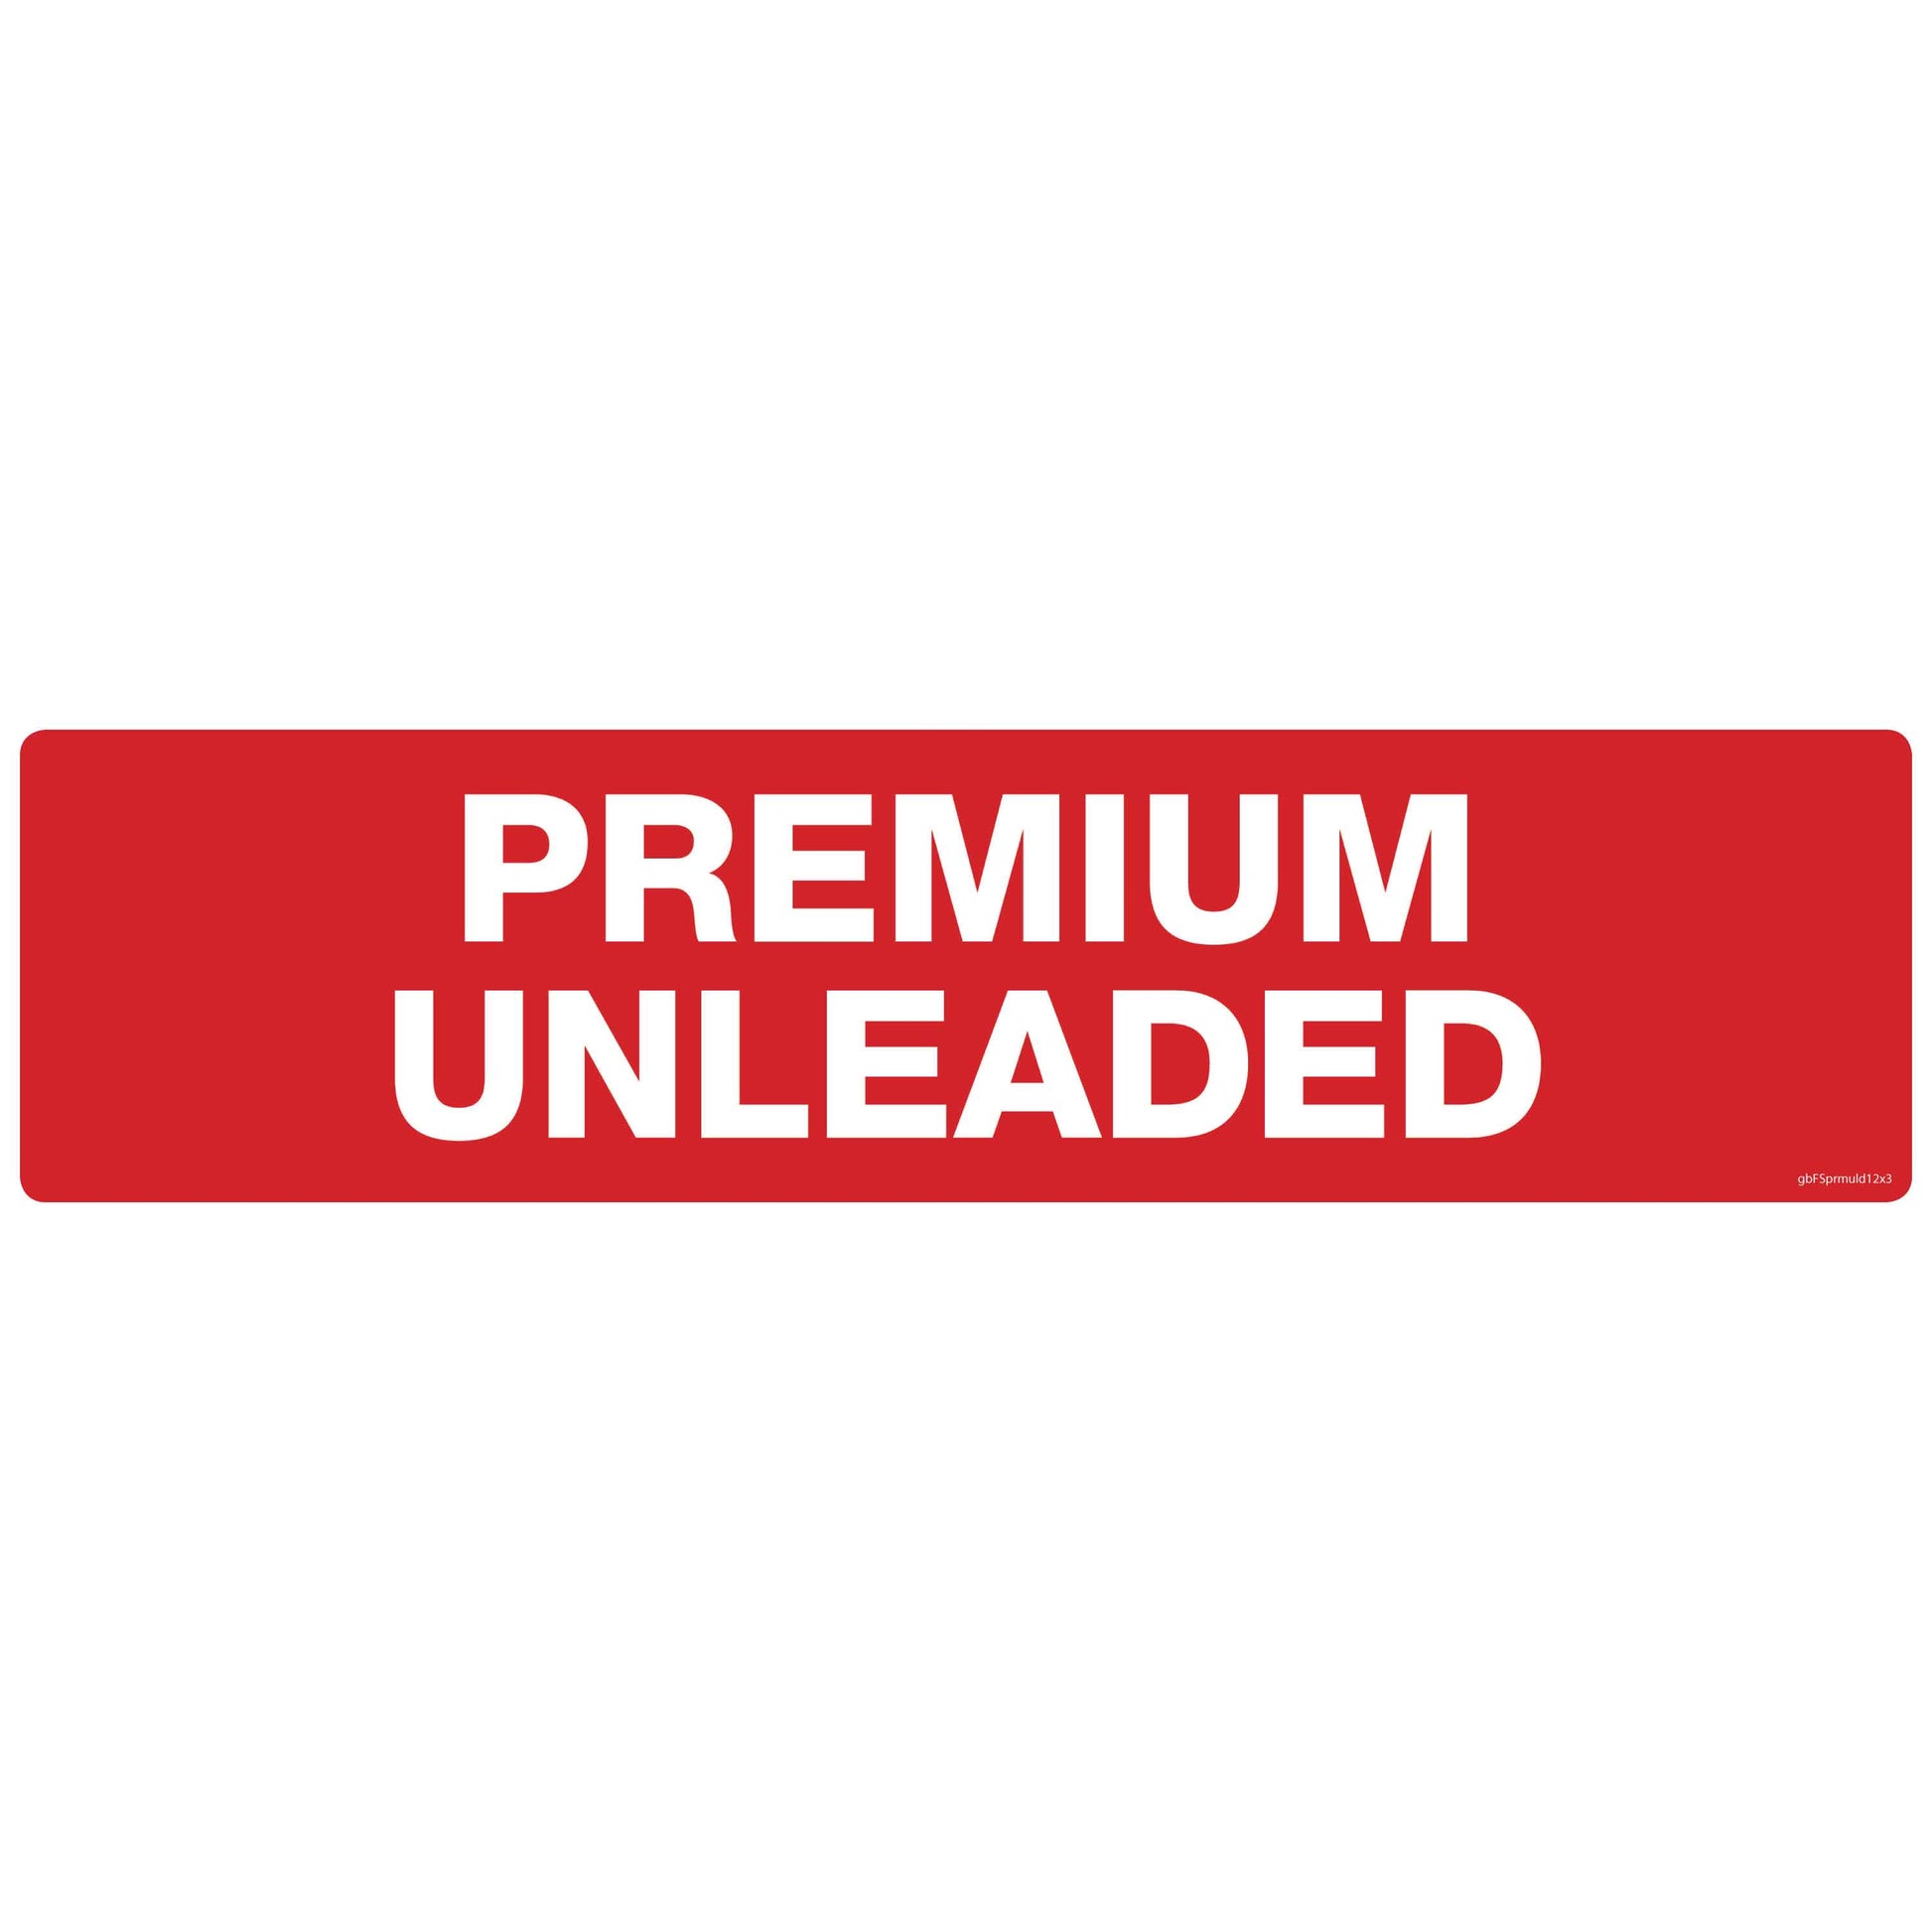 Premium Unleaded Decal. 12 inches by 3 inches in size. 